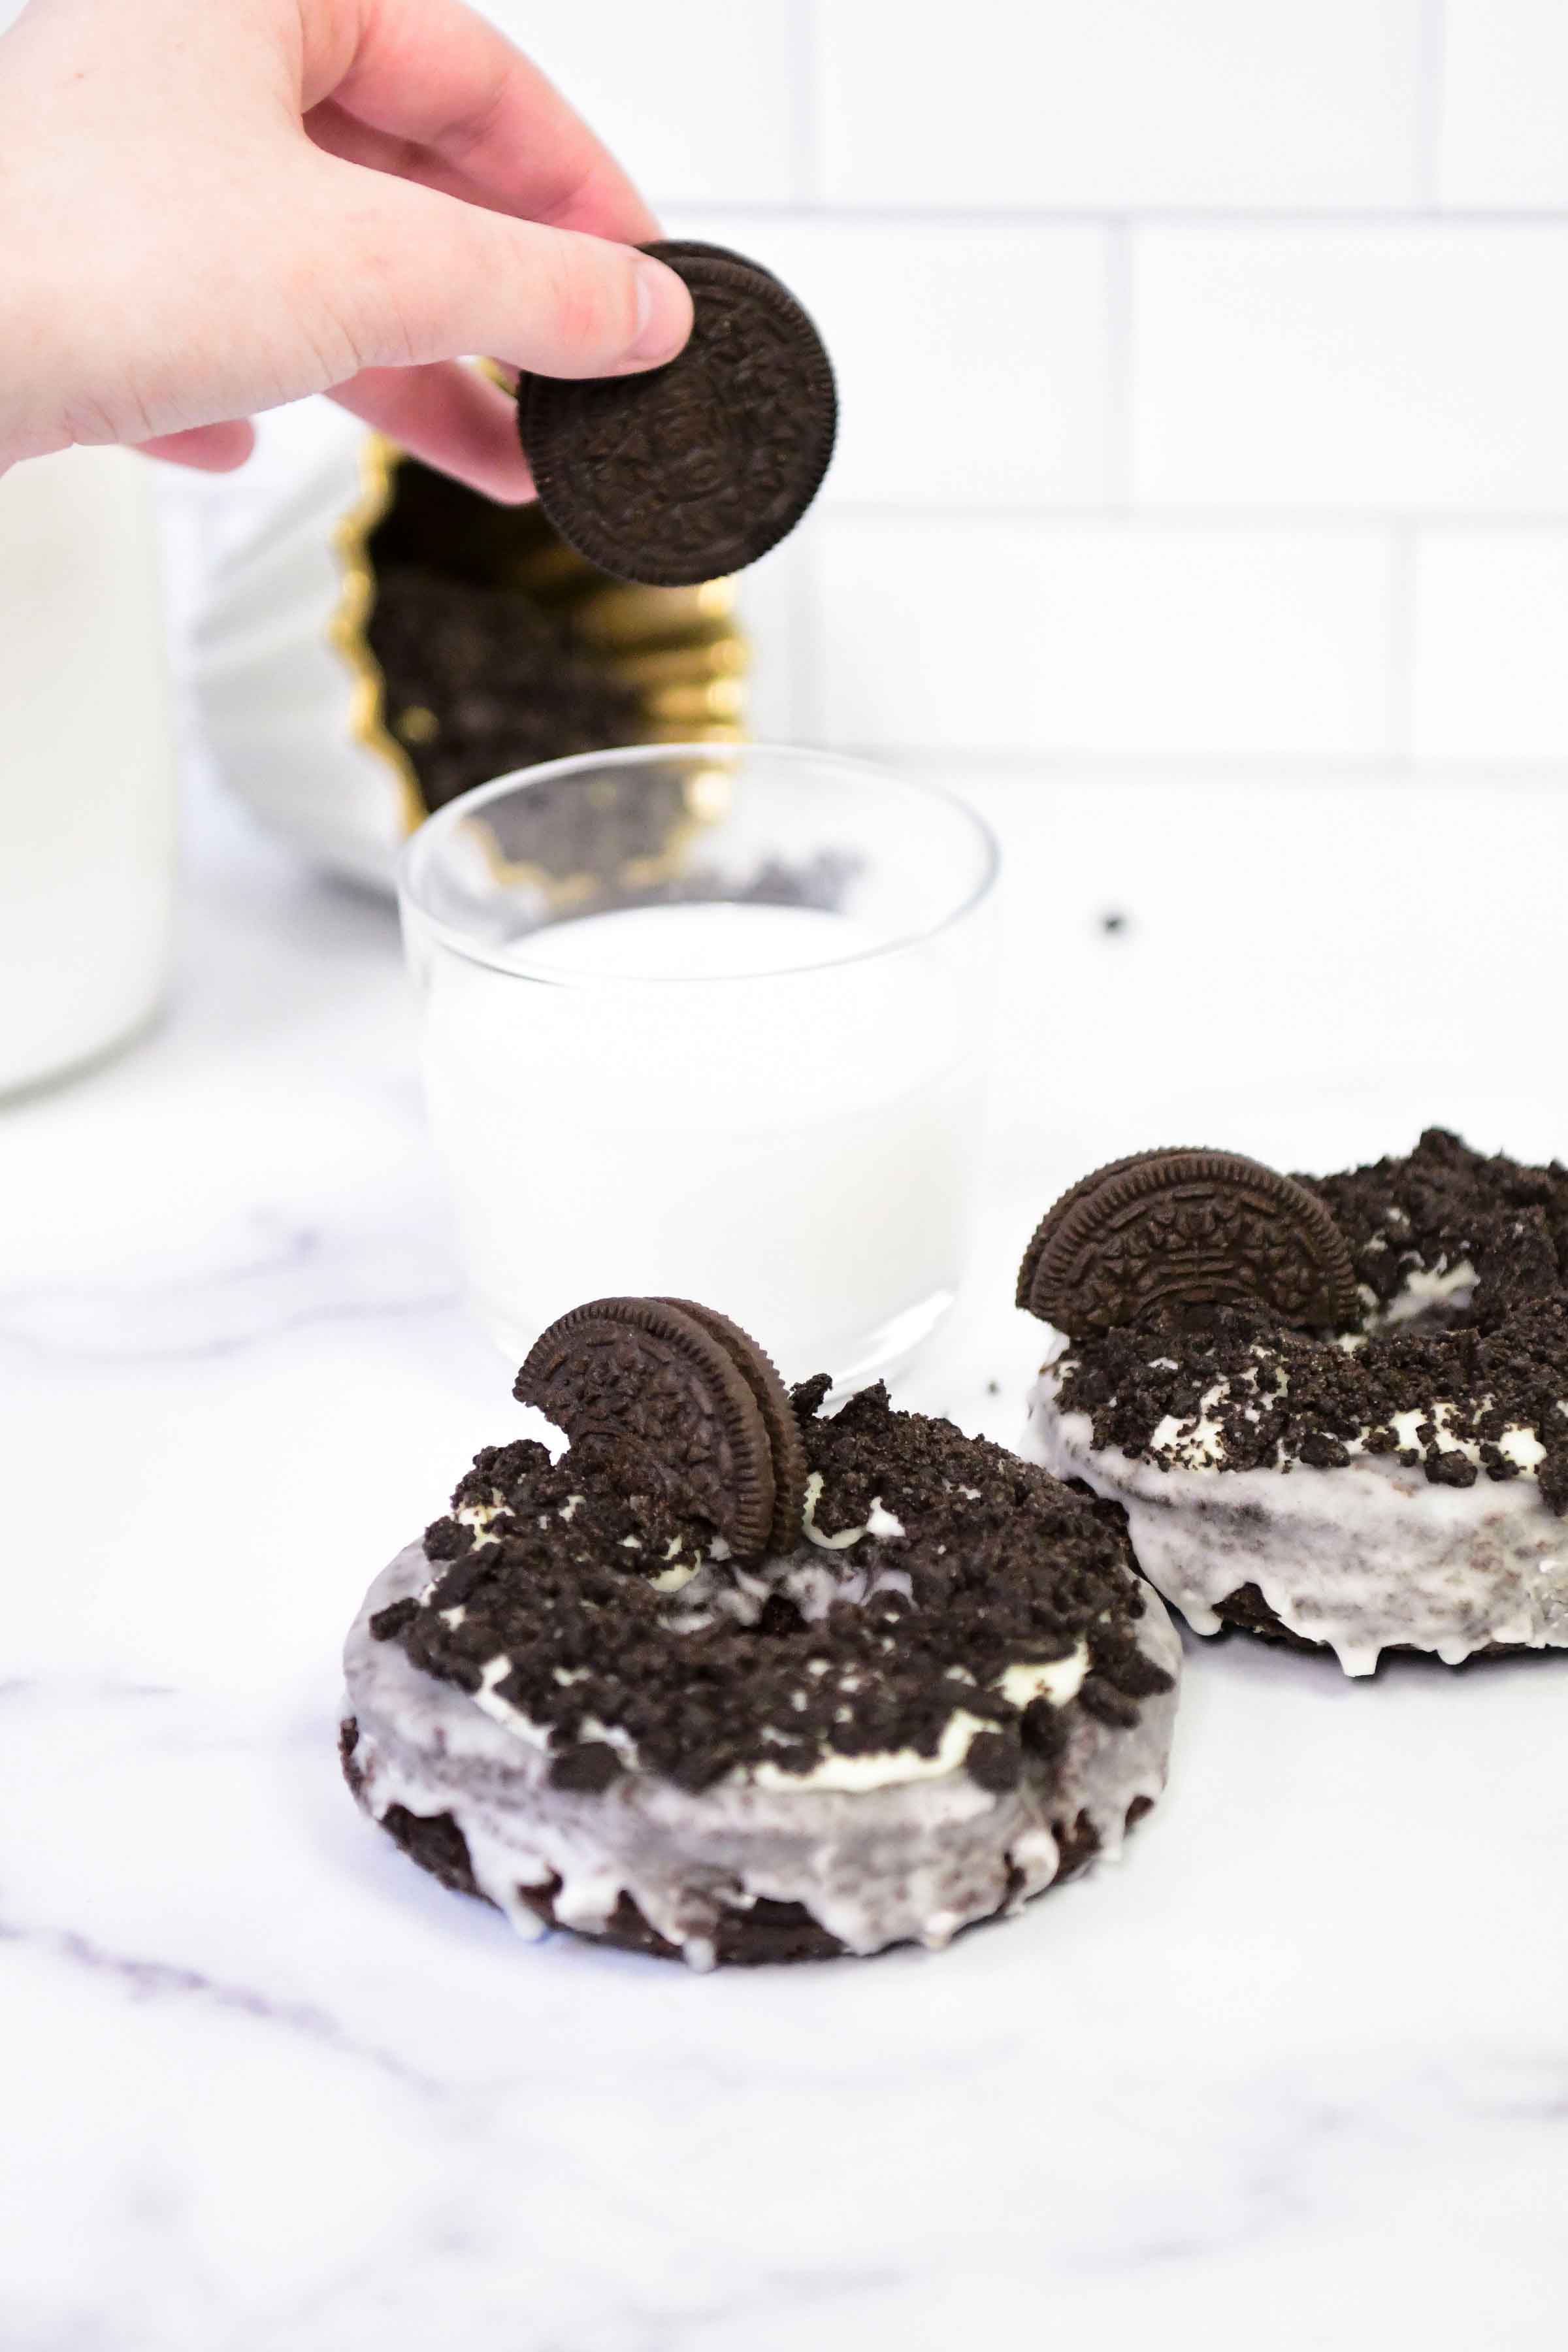 cream and chocolate chips covered donut with an oreo cookie on top and a hand dipping one of the cookies in a milk cup